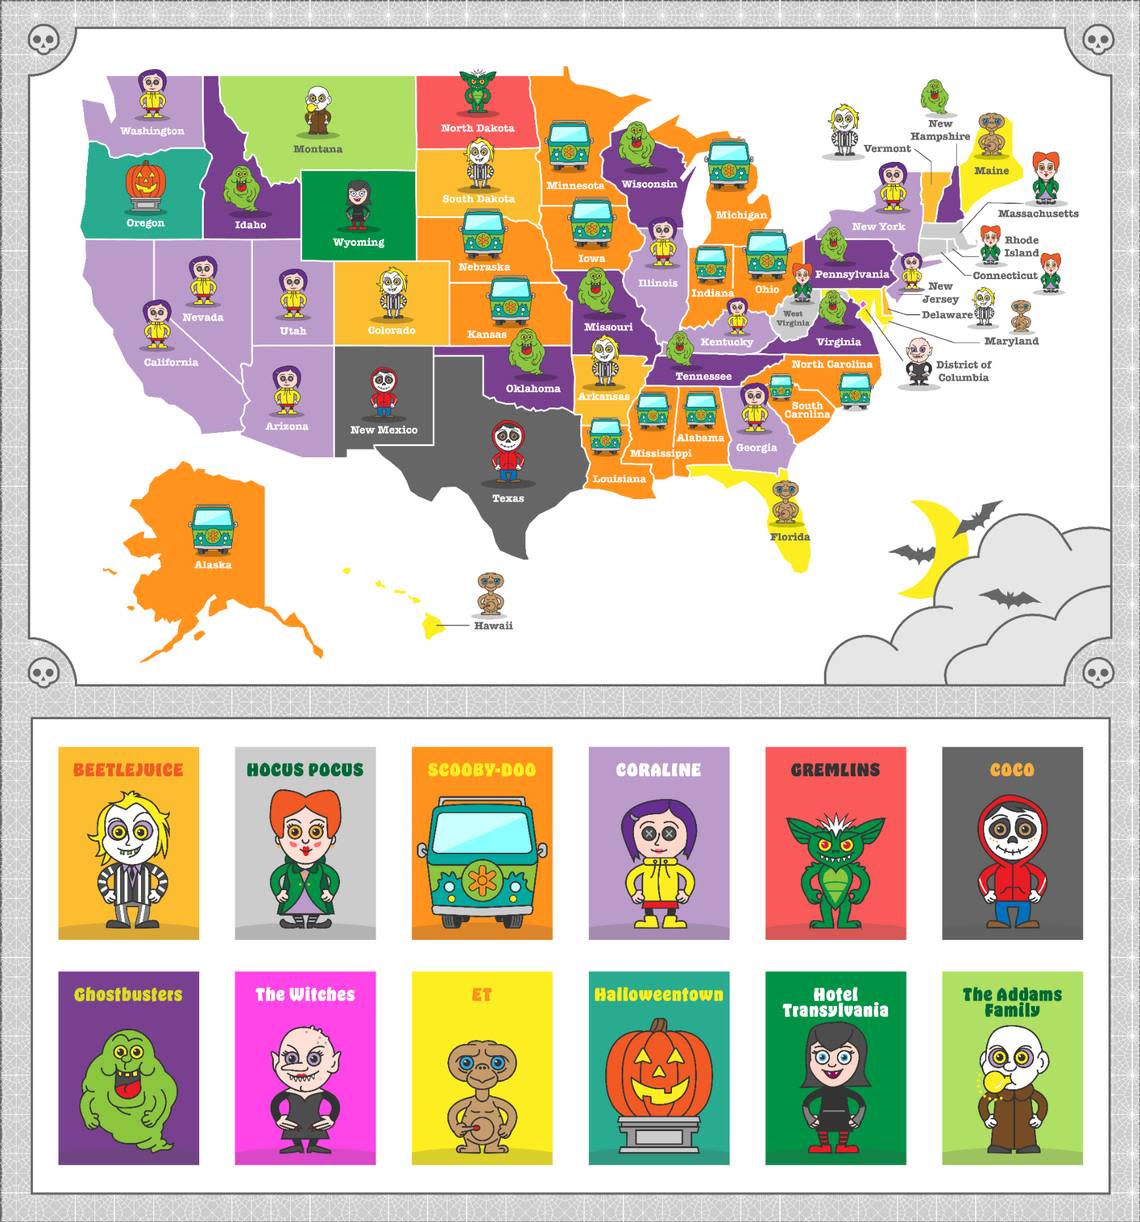 A map provided by USDish displaying the most searched Halloween movies for kids this year by state.